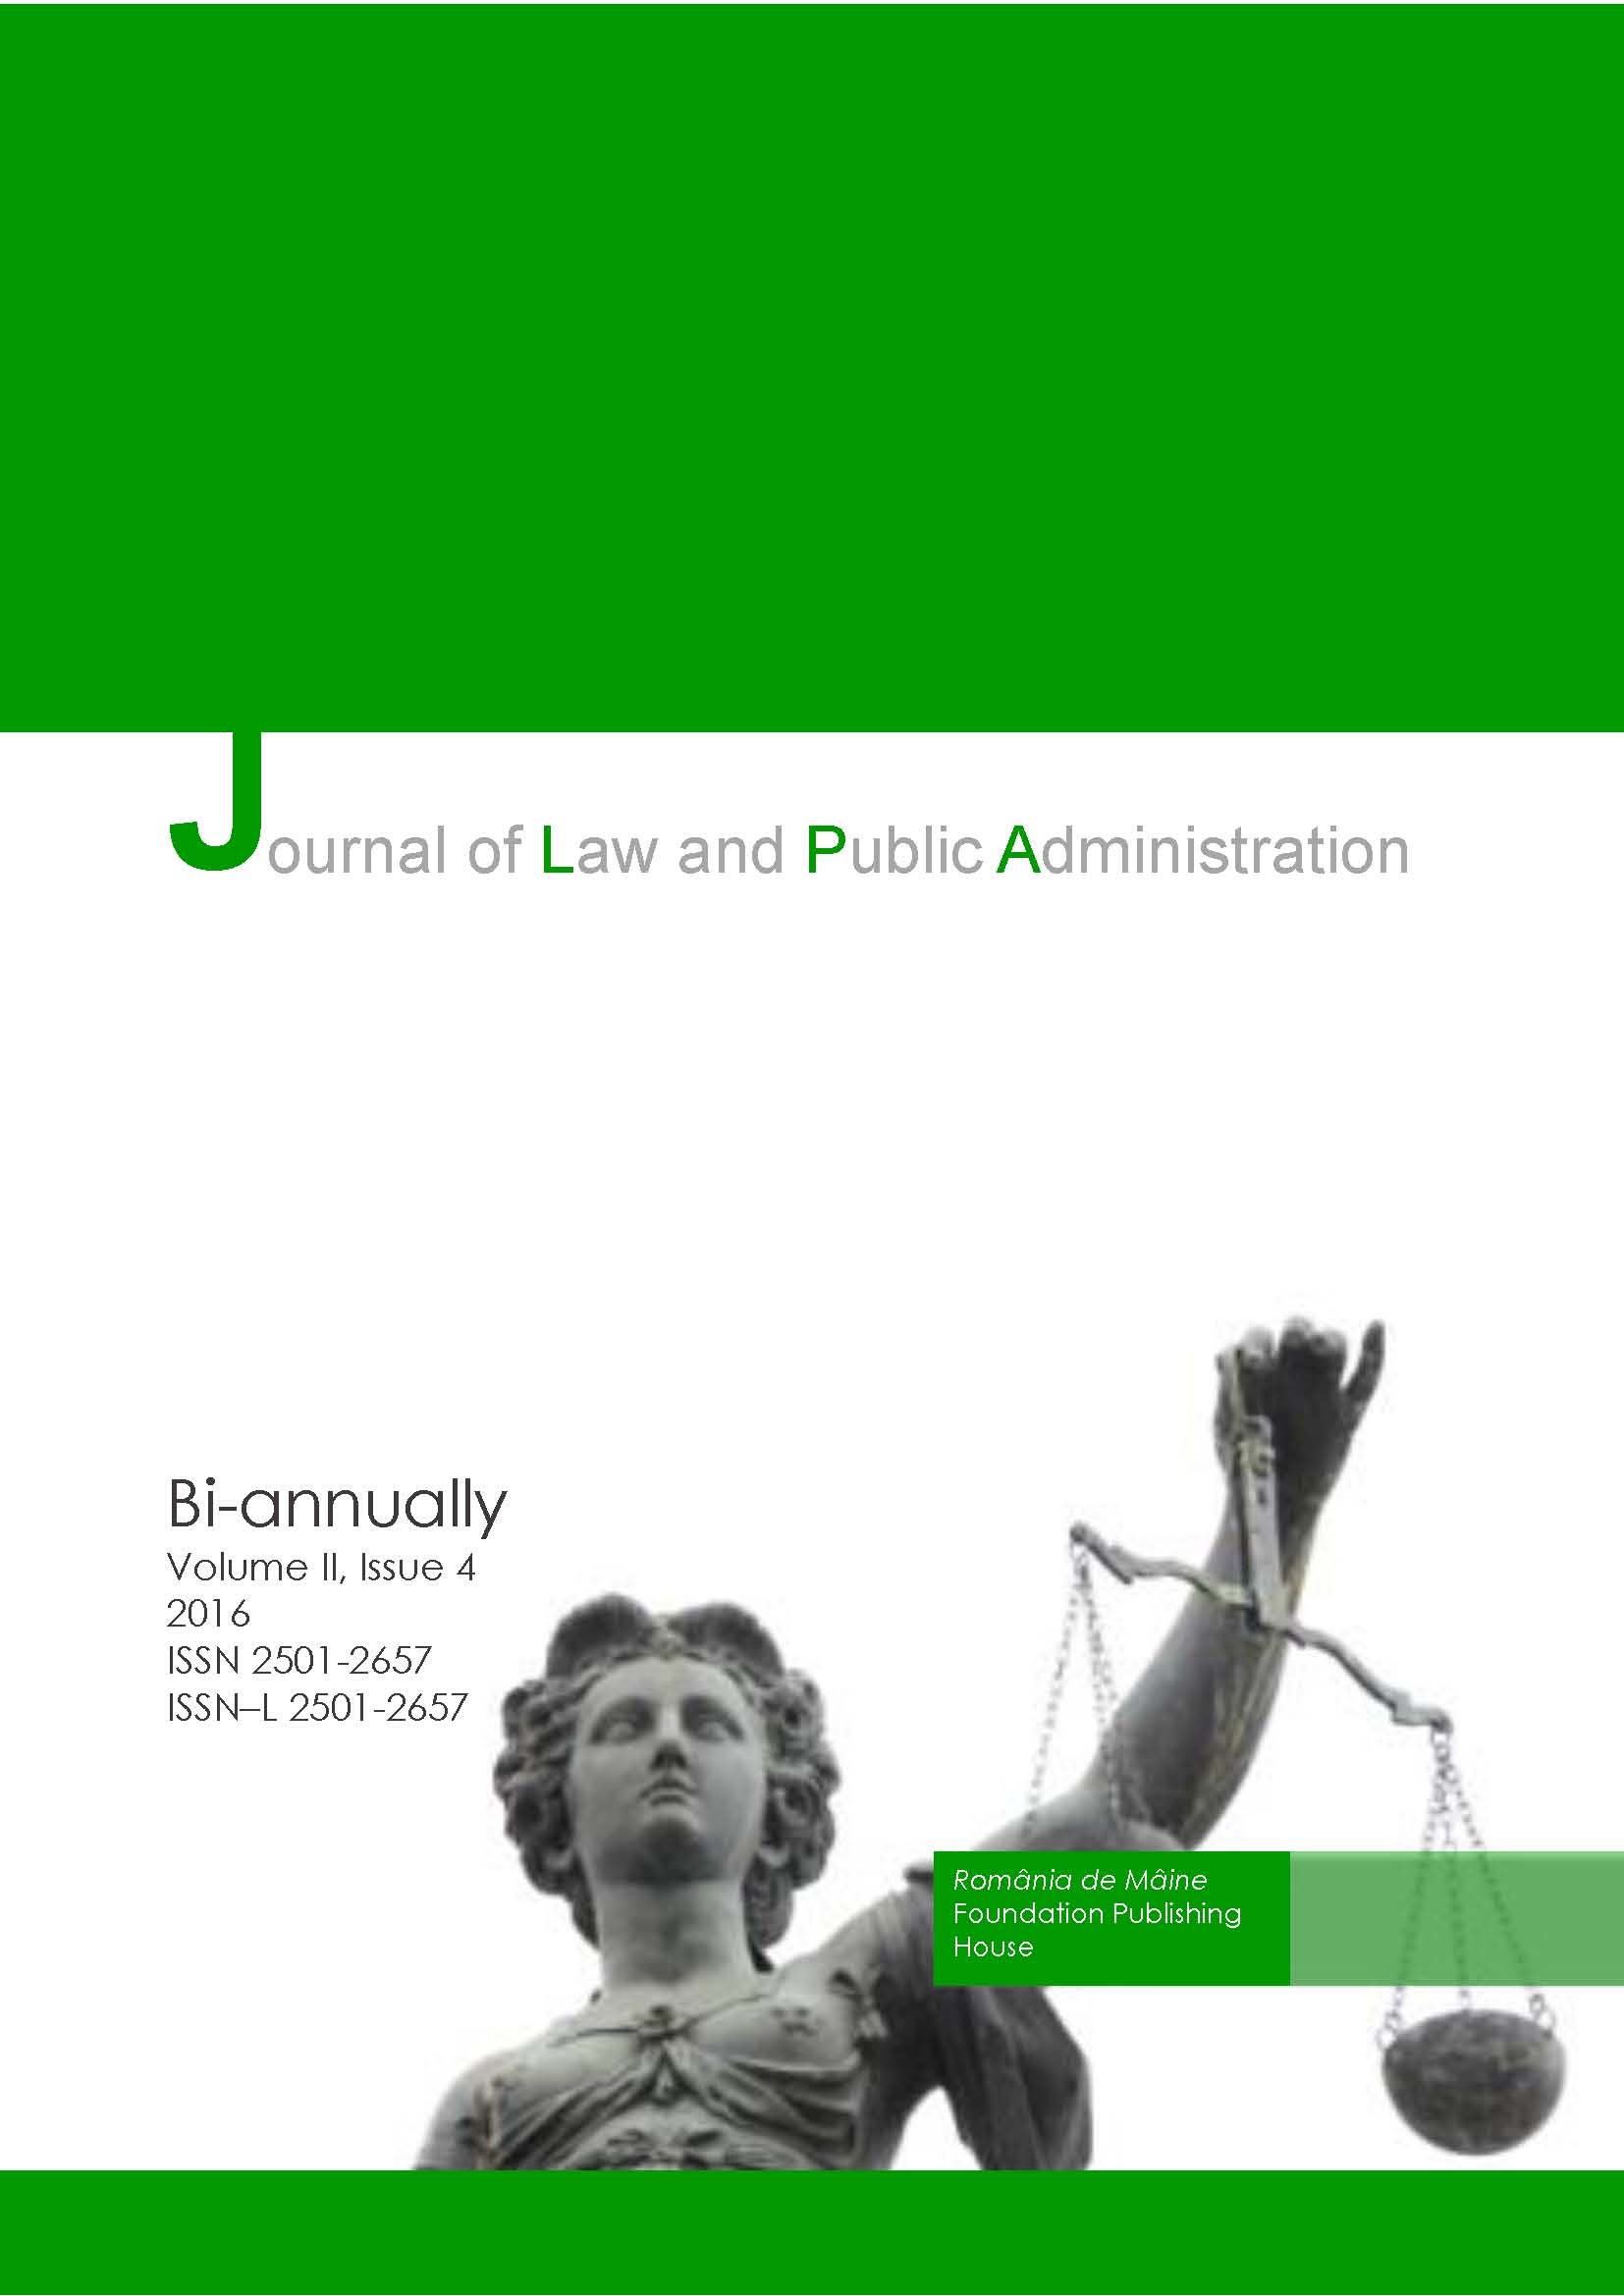 Can We Discuss About a Contemporary Law Crisis? Cover Image